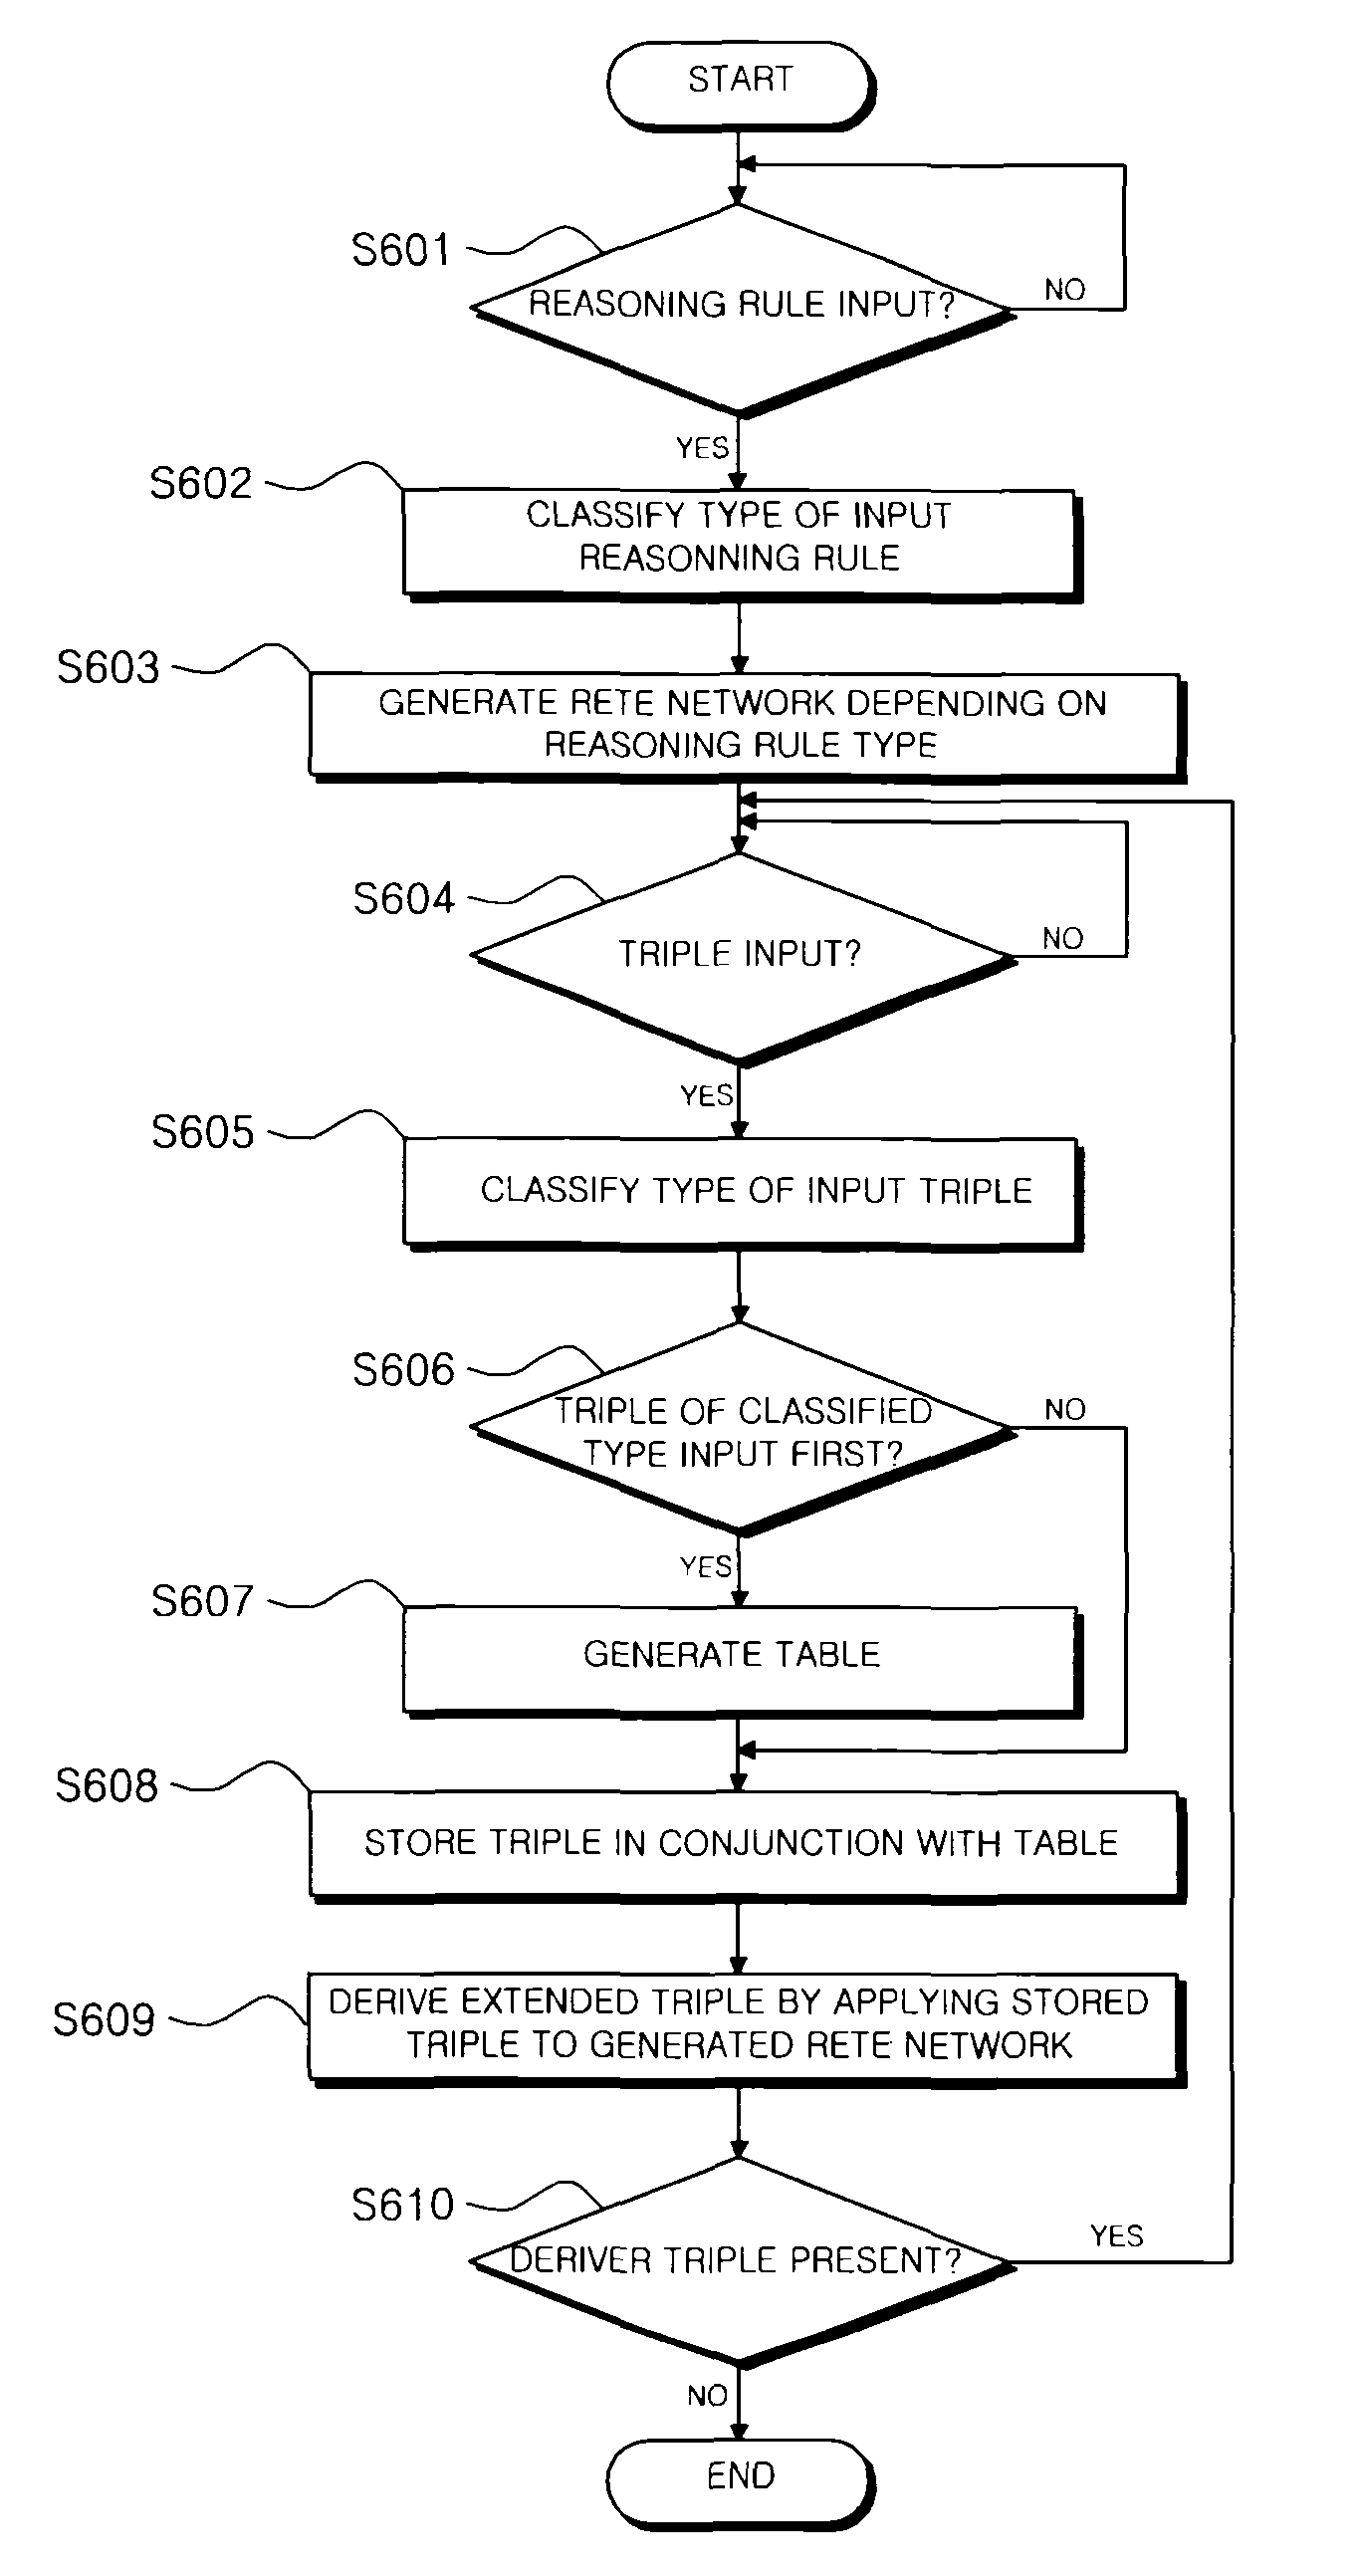 System and method for hybrid Rete reasoning based on in-memory and DBMS